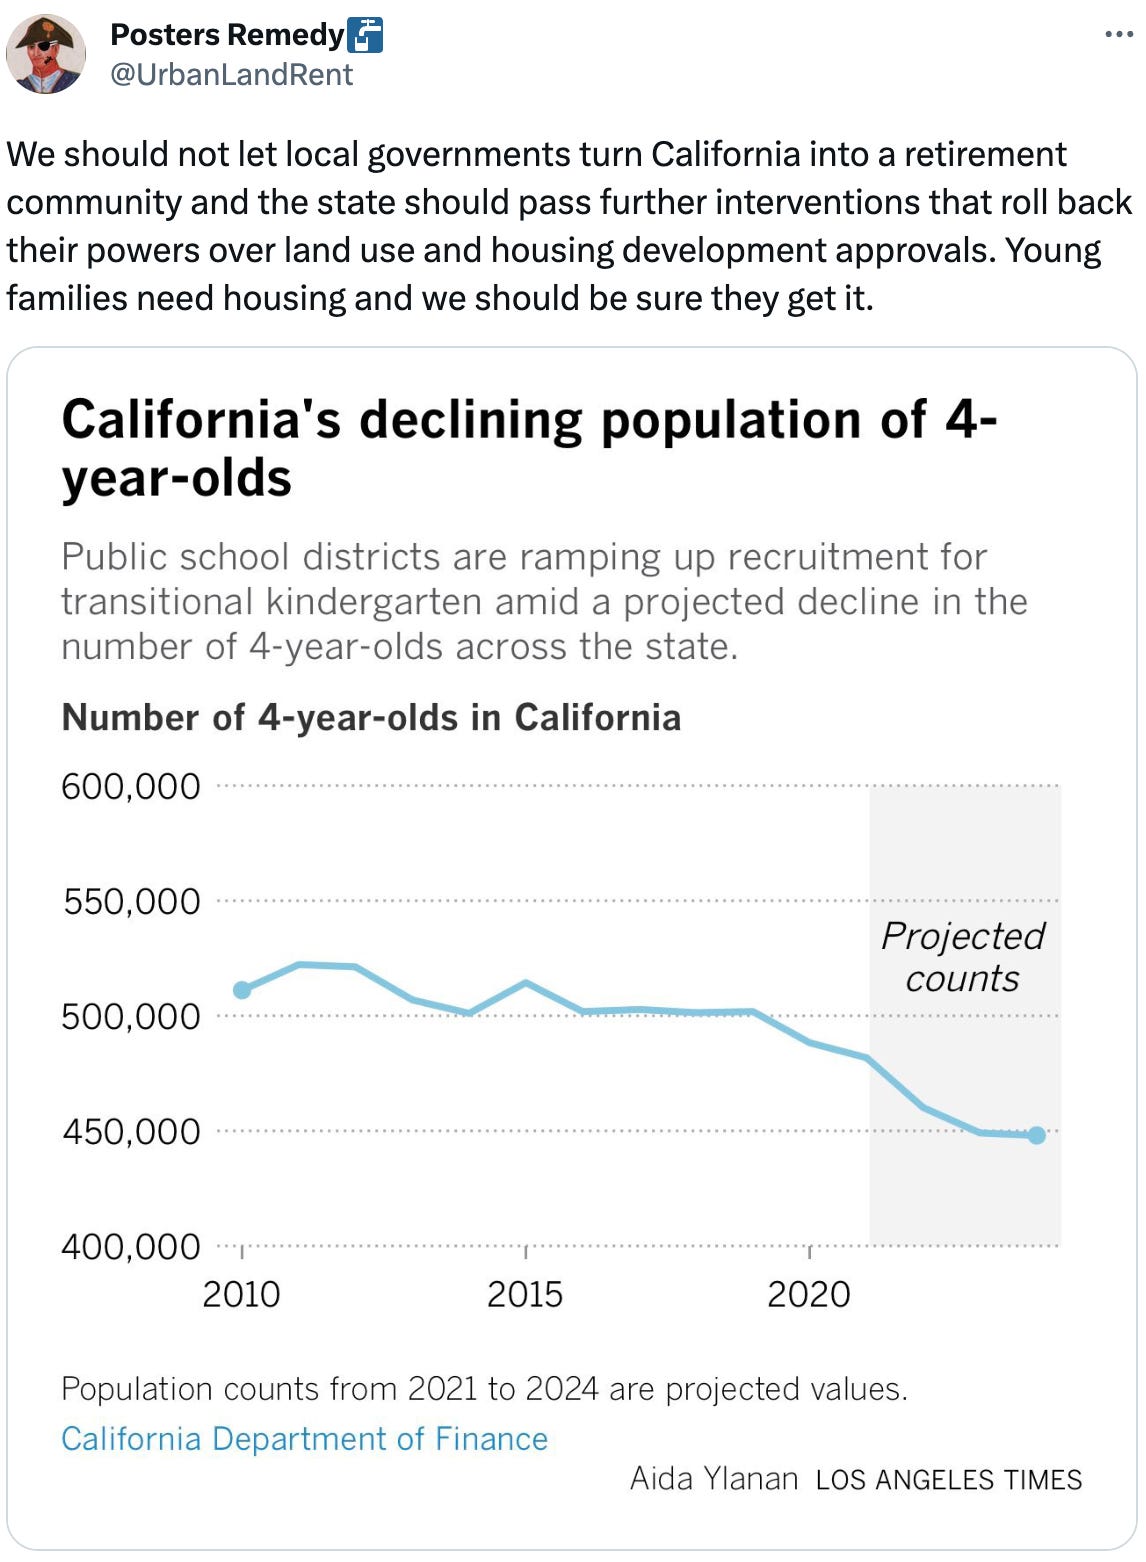  See new Tweets Conversation Posters Remedy🚰 @UrbanLandRent We should not let local governments turn California into a retirement community and the state should pass further interventions that roll back their powers over land use and housing development approvals. Young families need housing and we should be sure they get it.